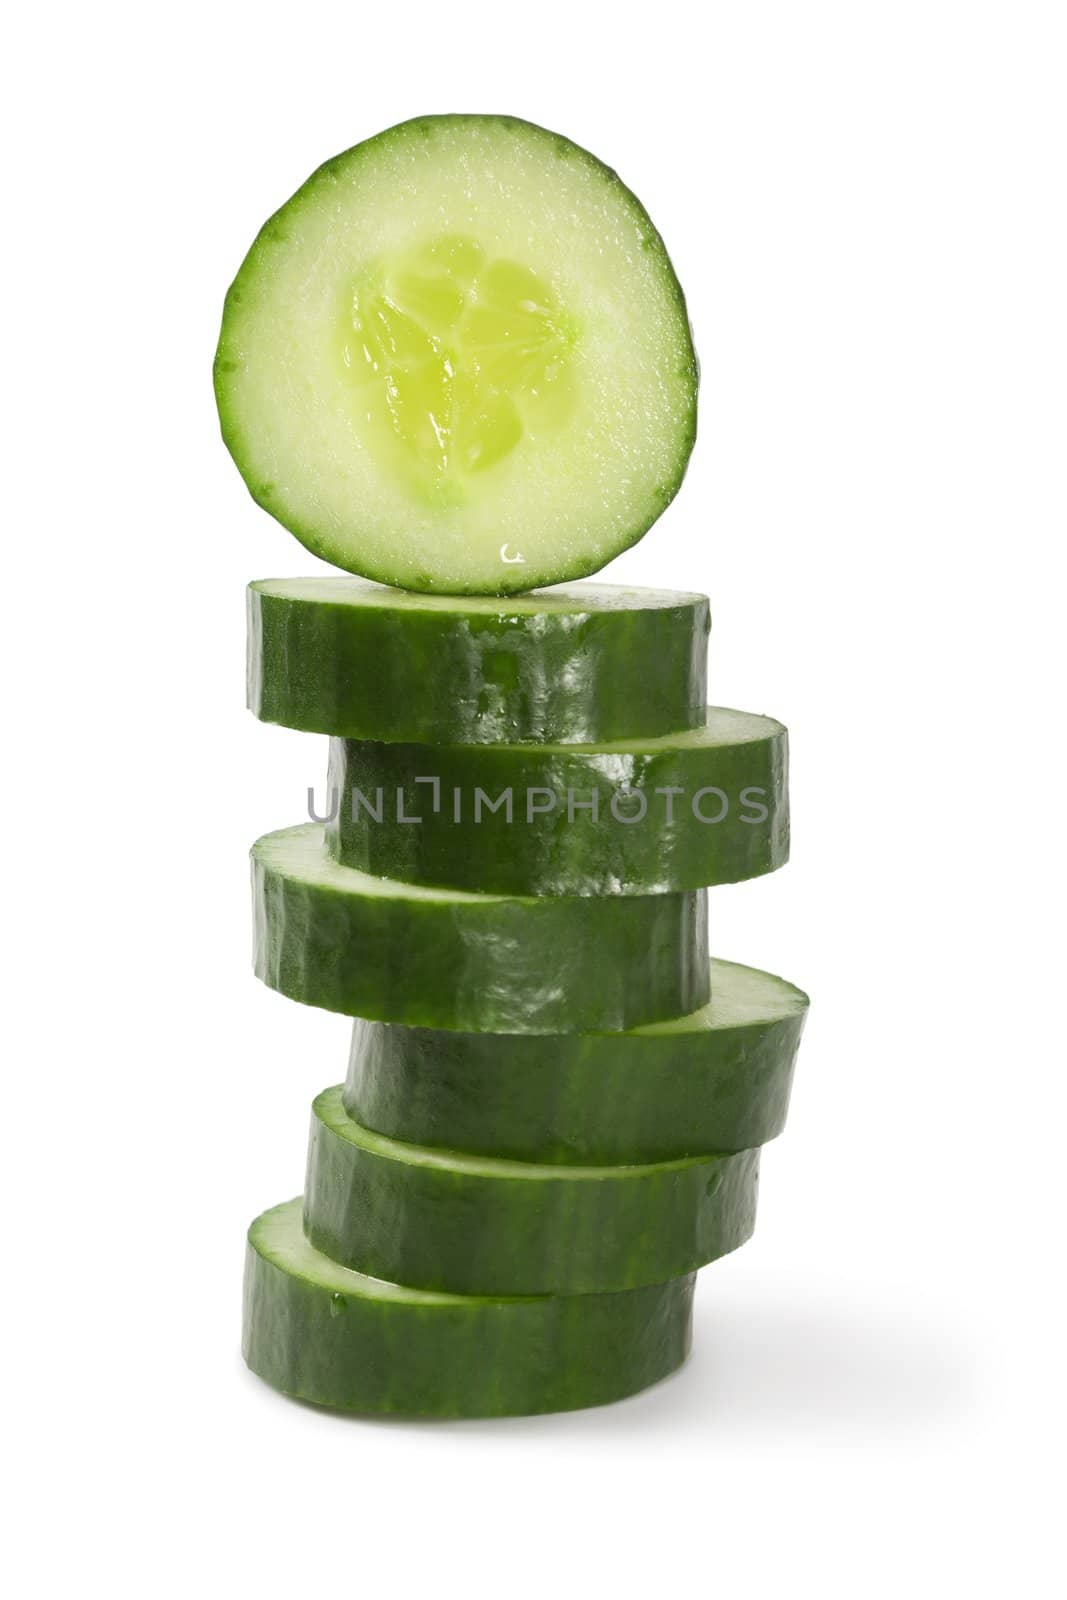 Cucumber stack by sumners